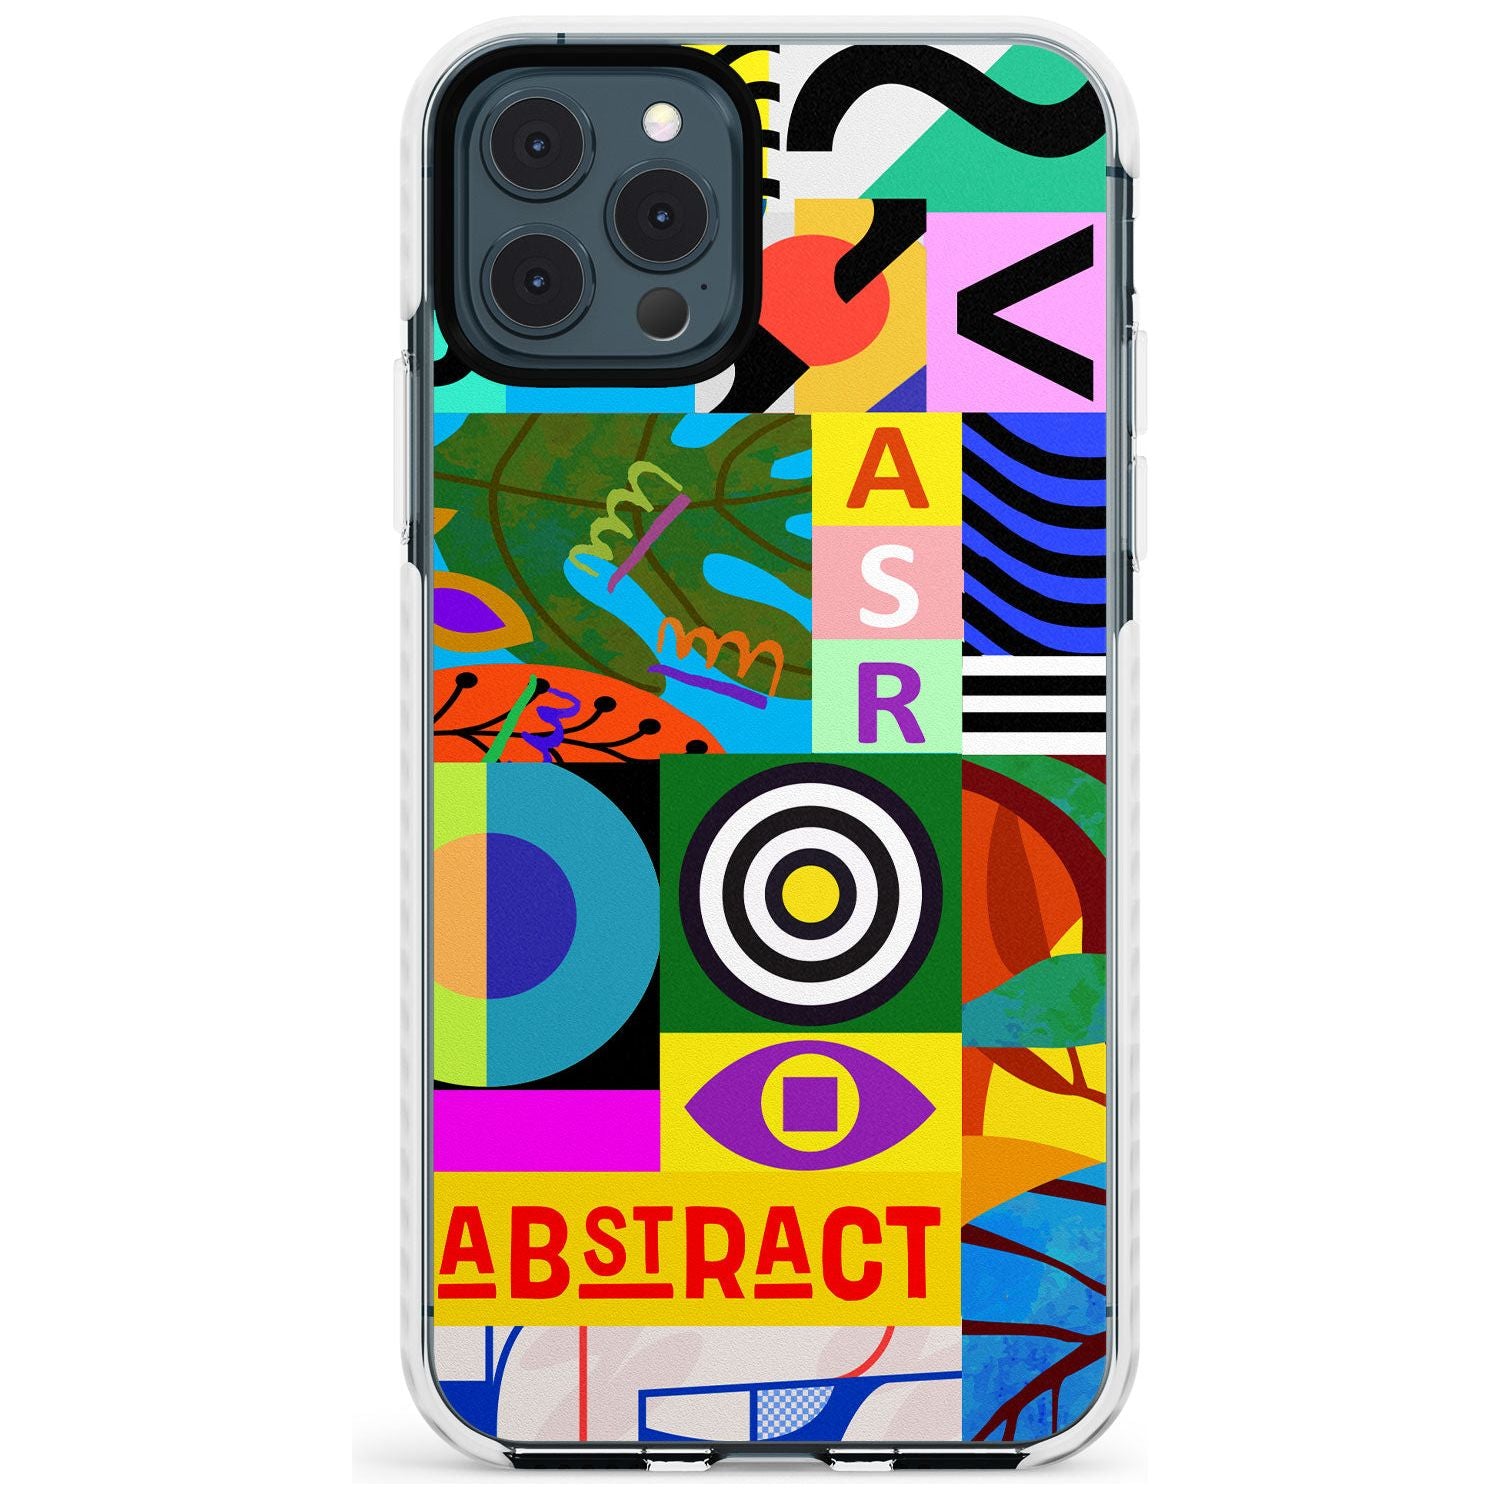 Patchwork Slim TPU Phone Case for iPhone 11 Pro Max